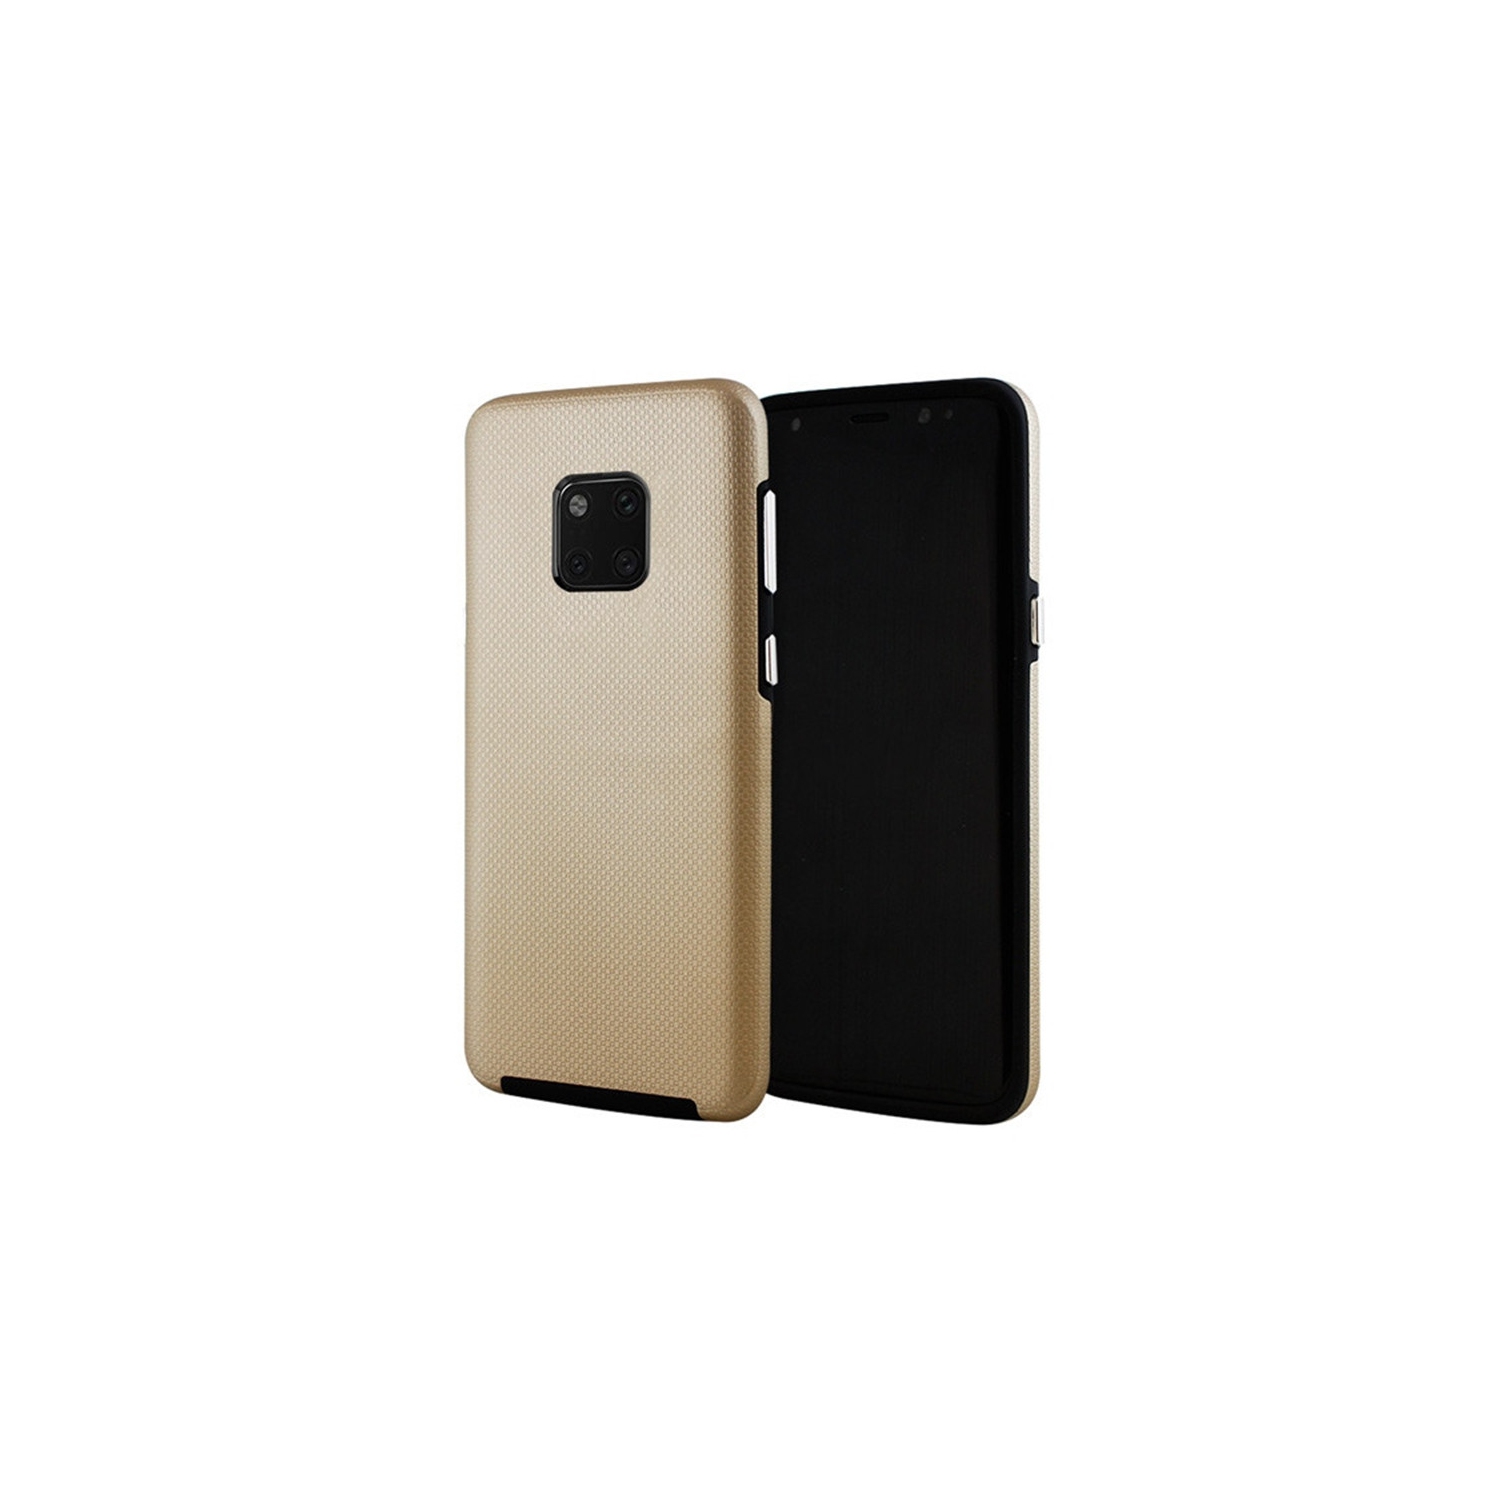 【CSmart】 Slim Fitted Hybrid Hard PC Shell Shockproof Scratch Resistant Case Cover for Huawei Mate 20 Pro, Gold